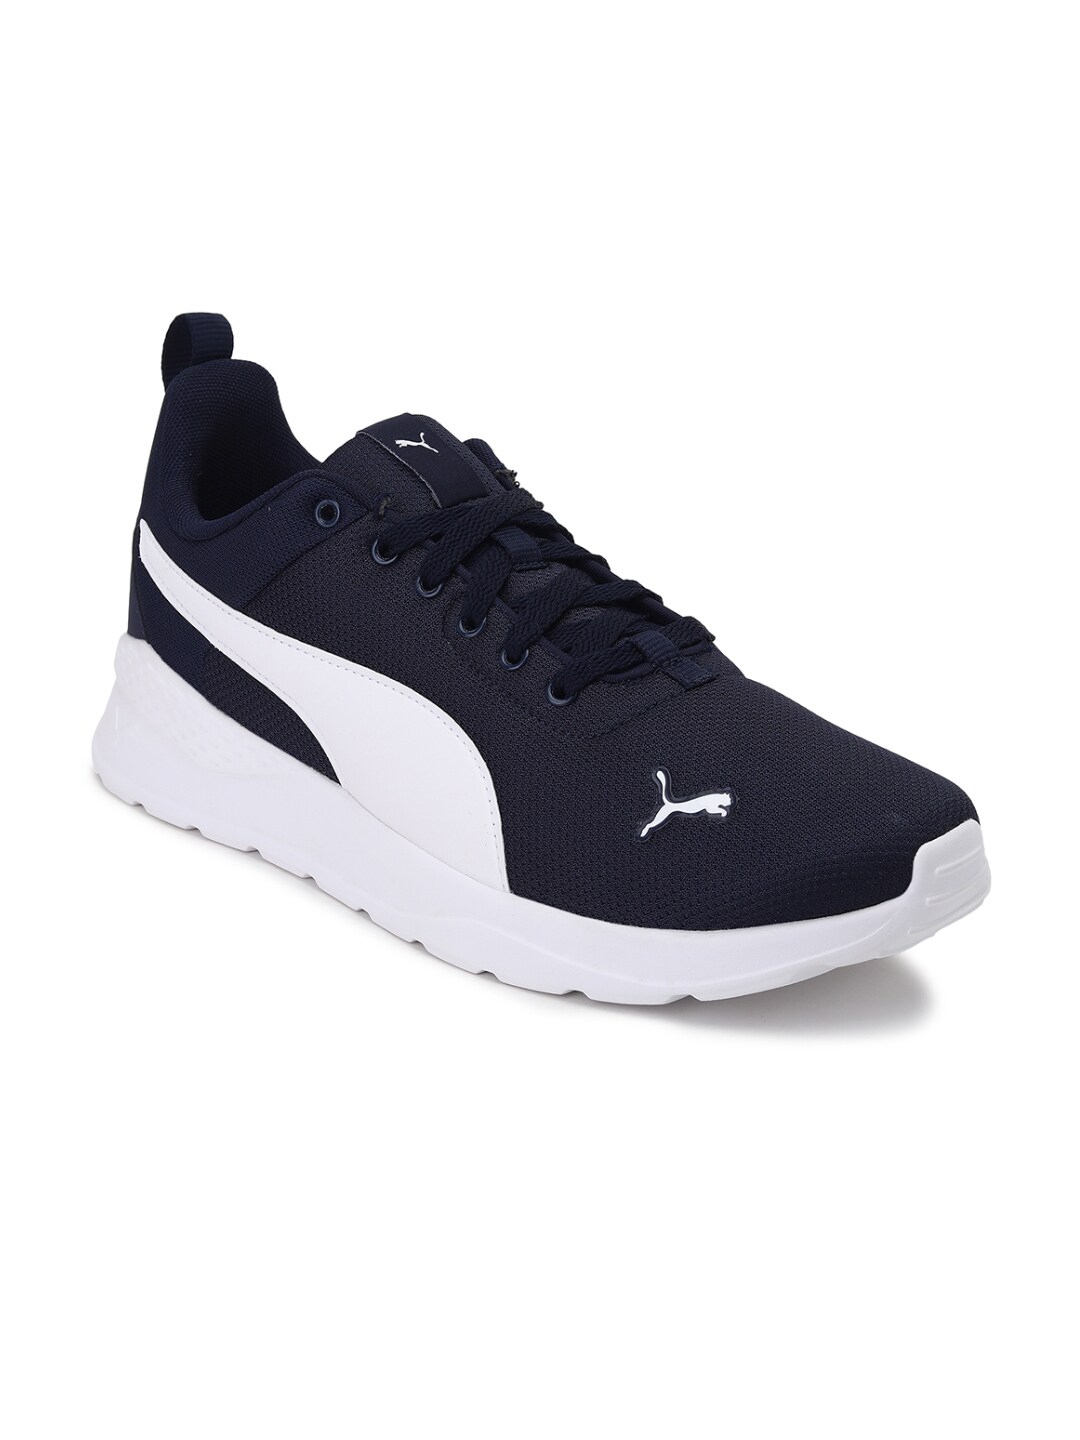 Buy Puma Unisex Navy Blue Mesh Running Shoes - Sports Shoes for Unisex ...